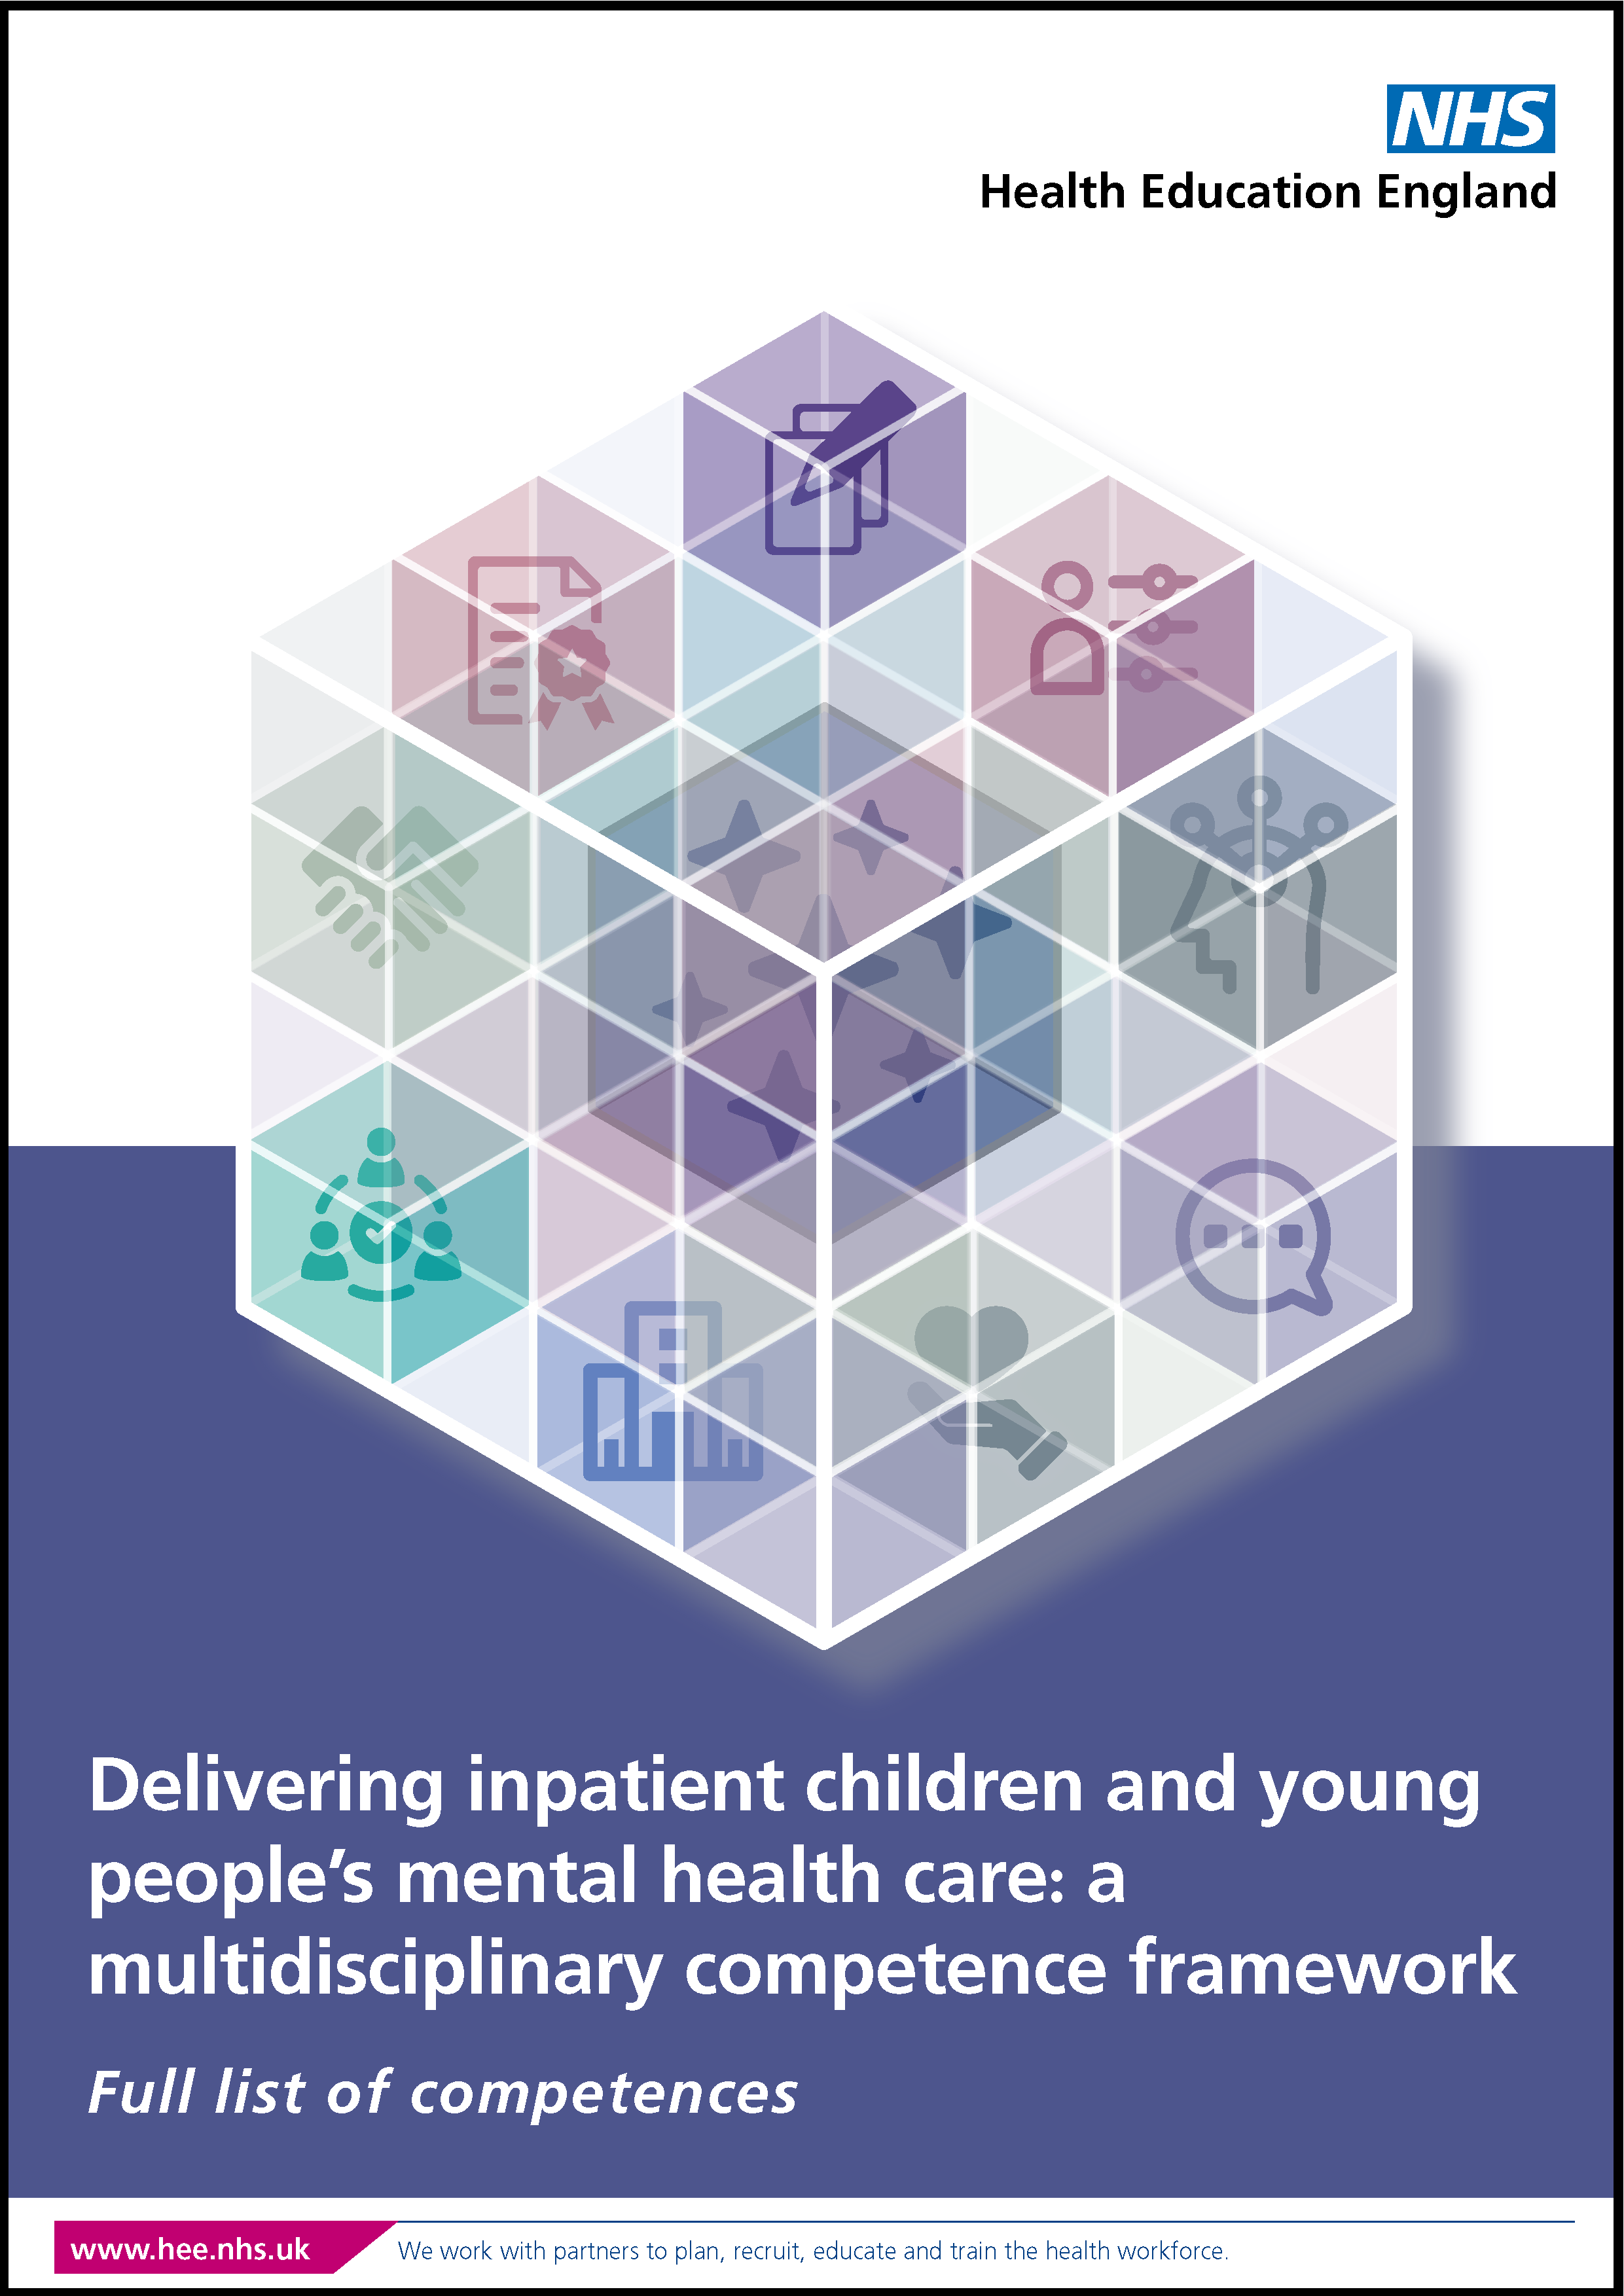 Delivering inpatient children and young people’s mental health care competence framework. Full list of competences cover